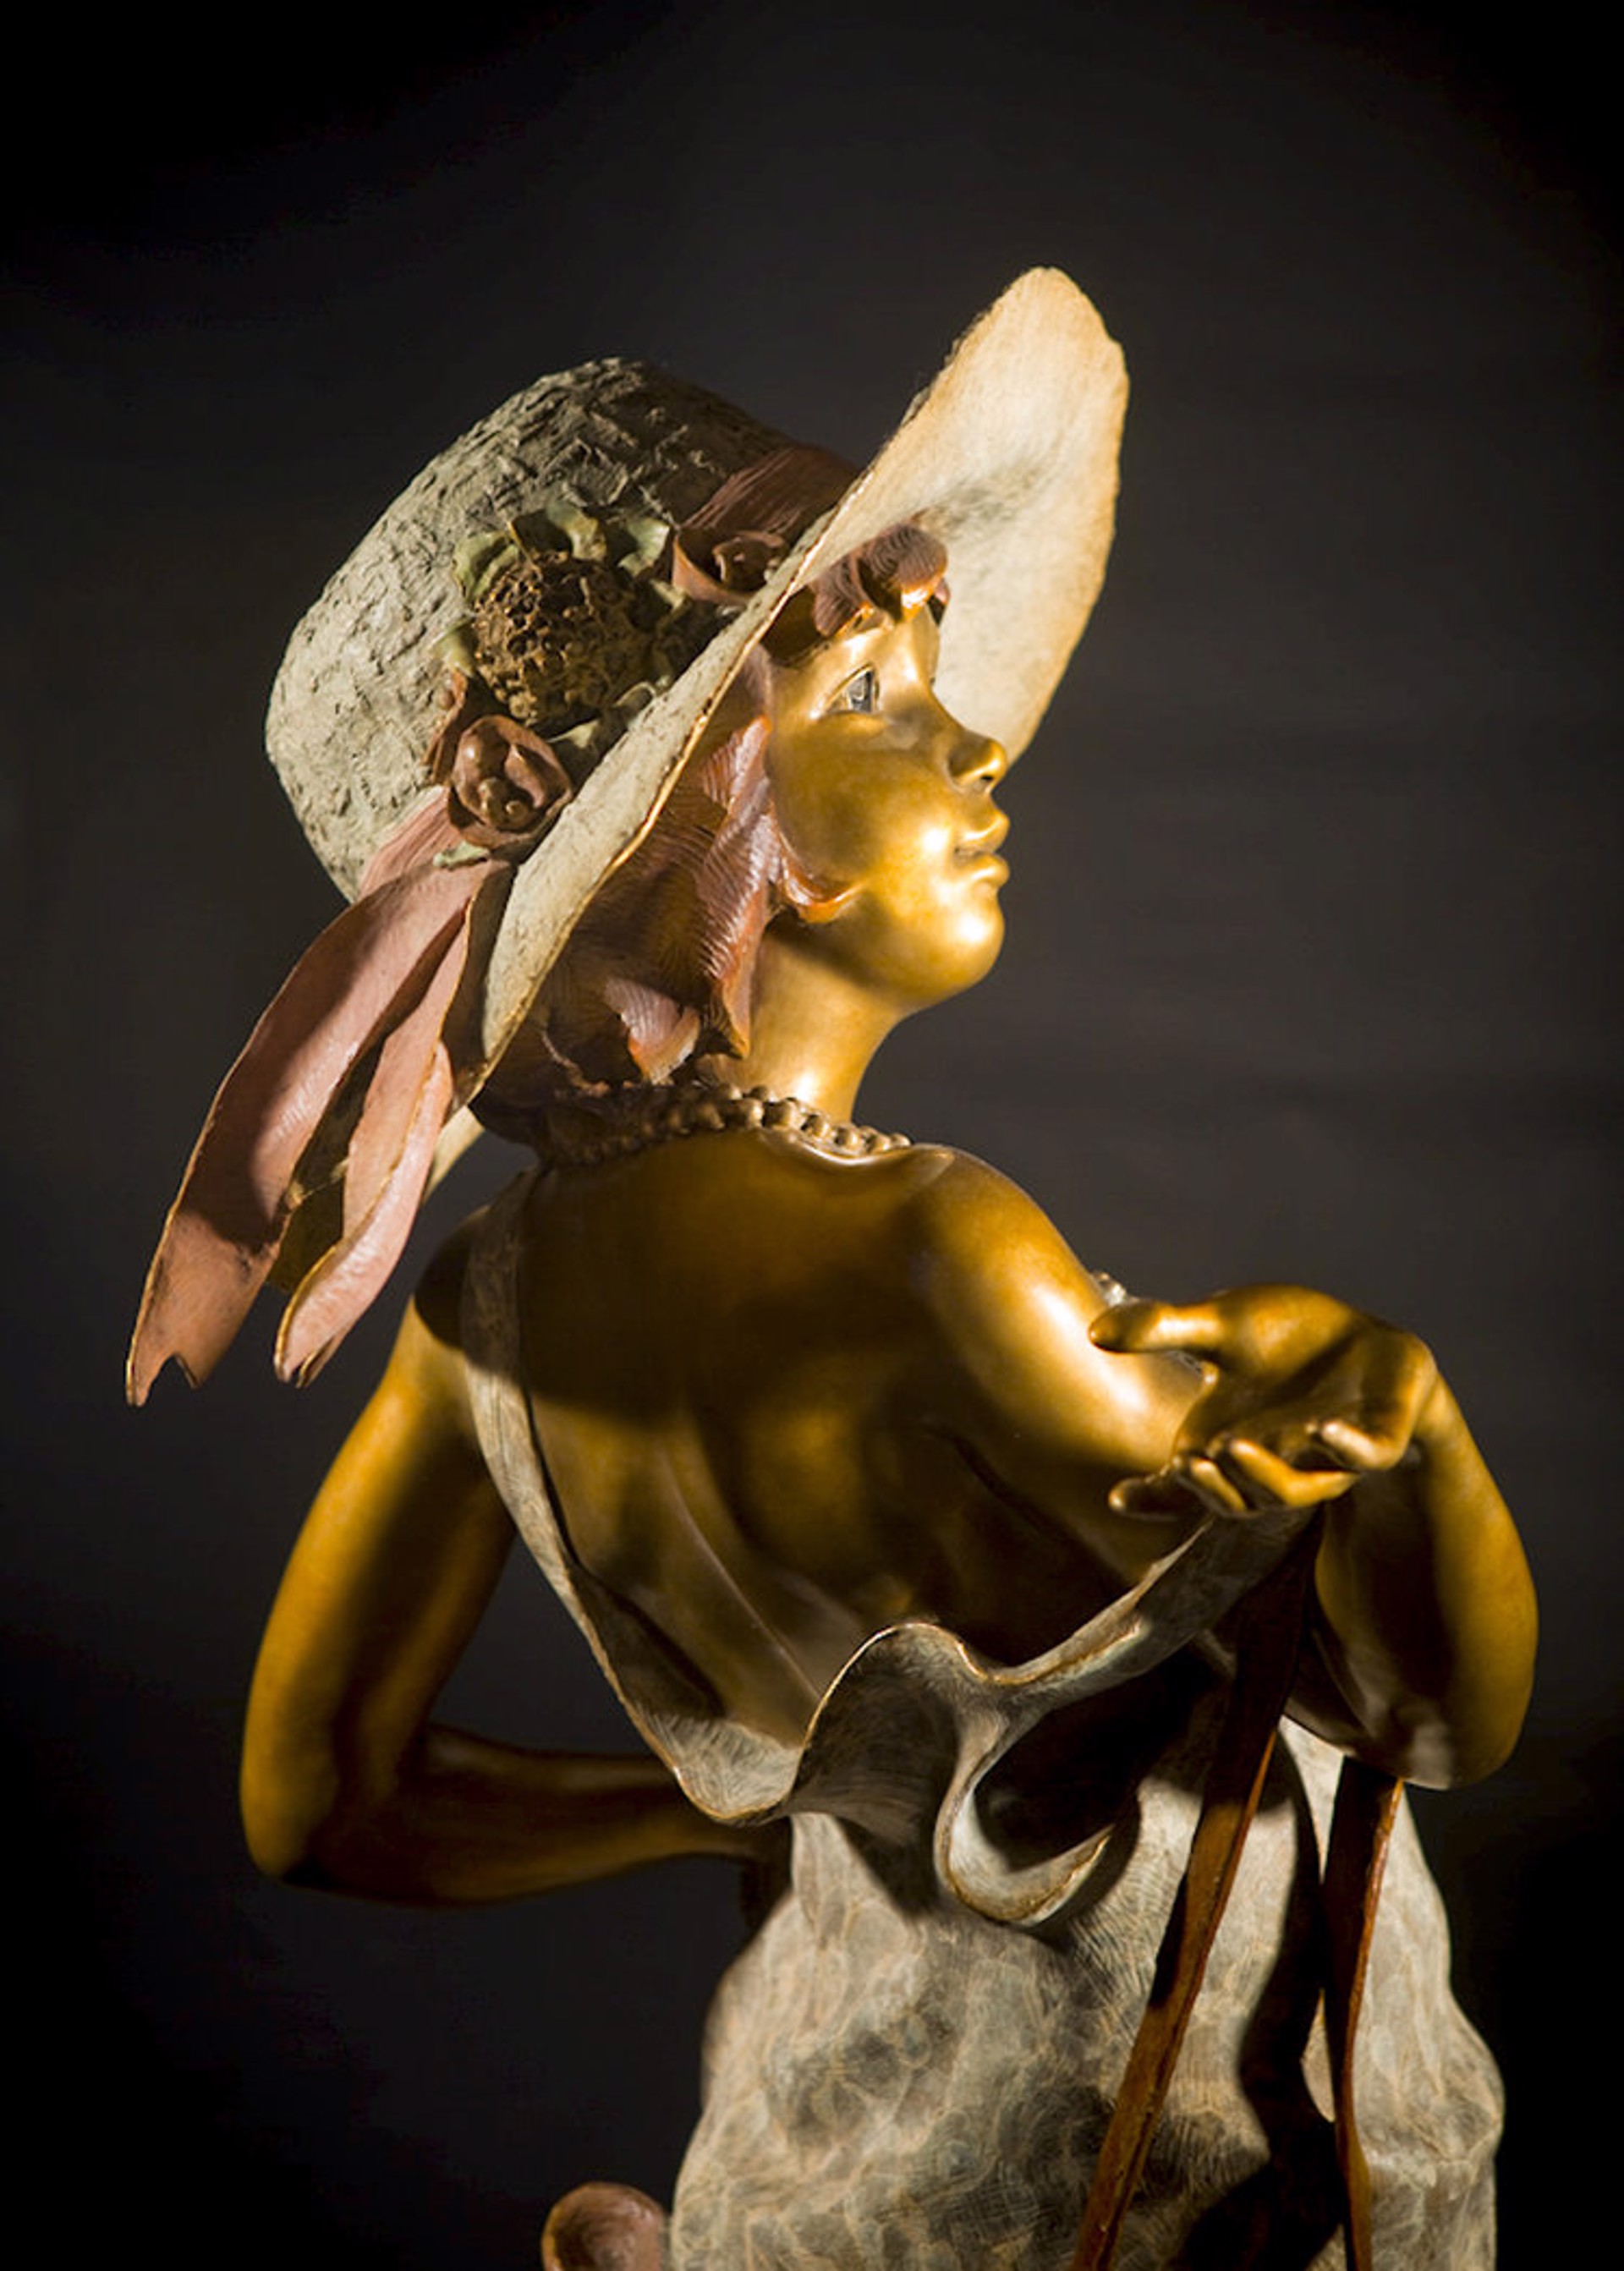 Lil' Lady (Maquette) (Edition of 150) by Walt Horton